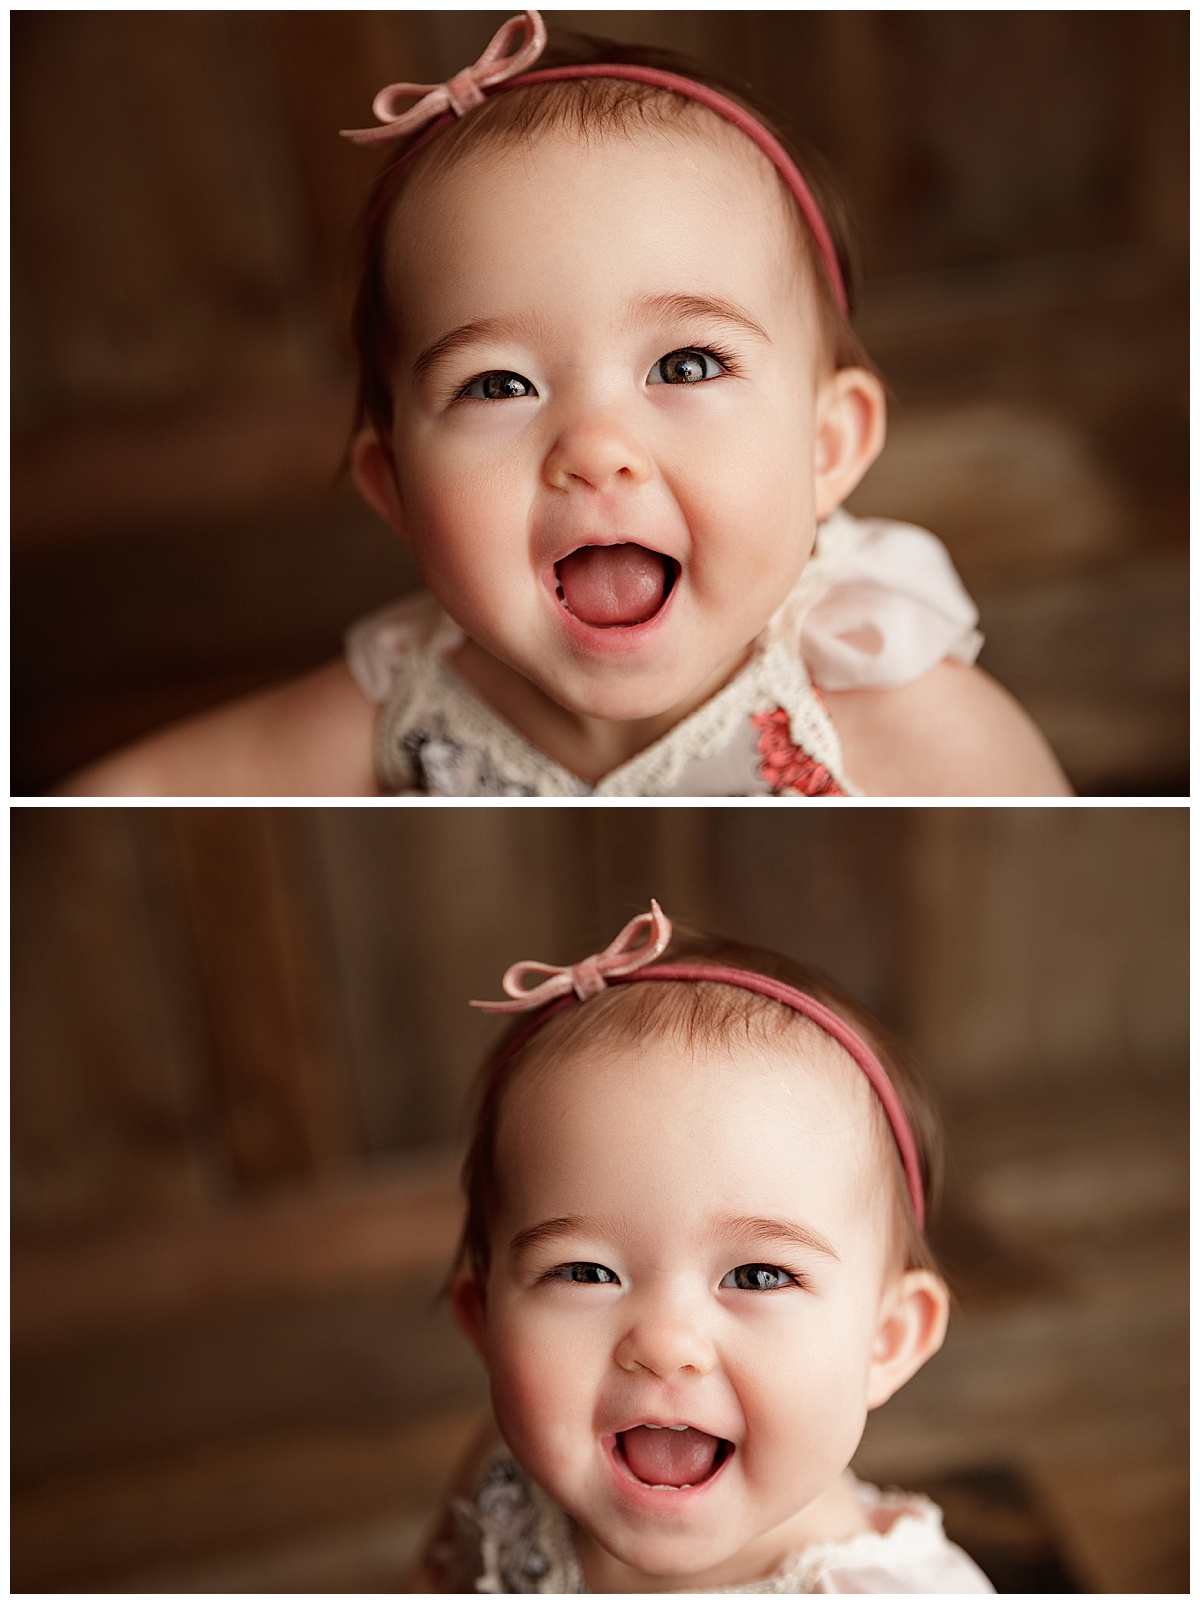 All smiles for baby by Washington DC Baby Photographer